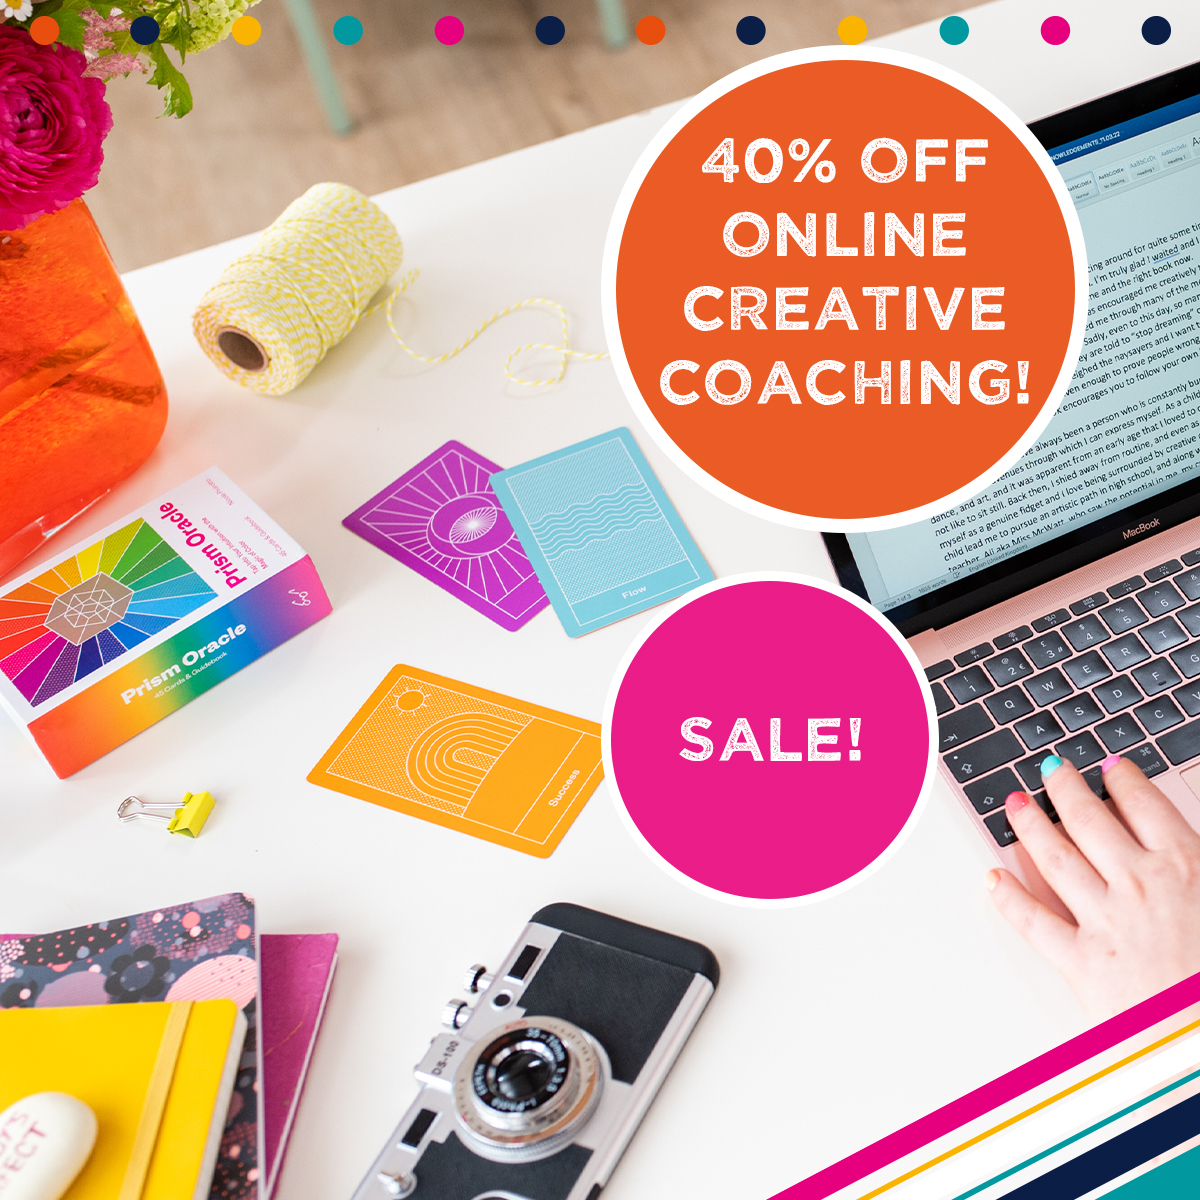 Tailored for you 1:1 online creative coaching - 40% off!